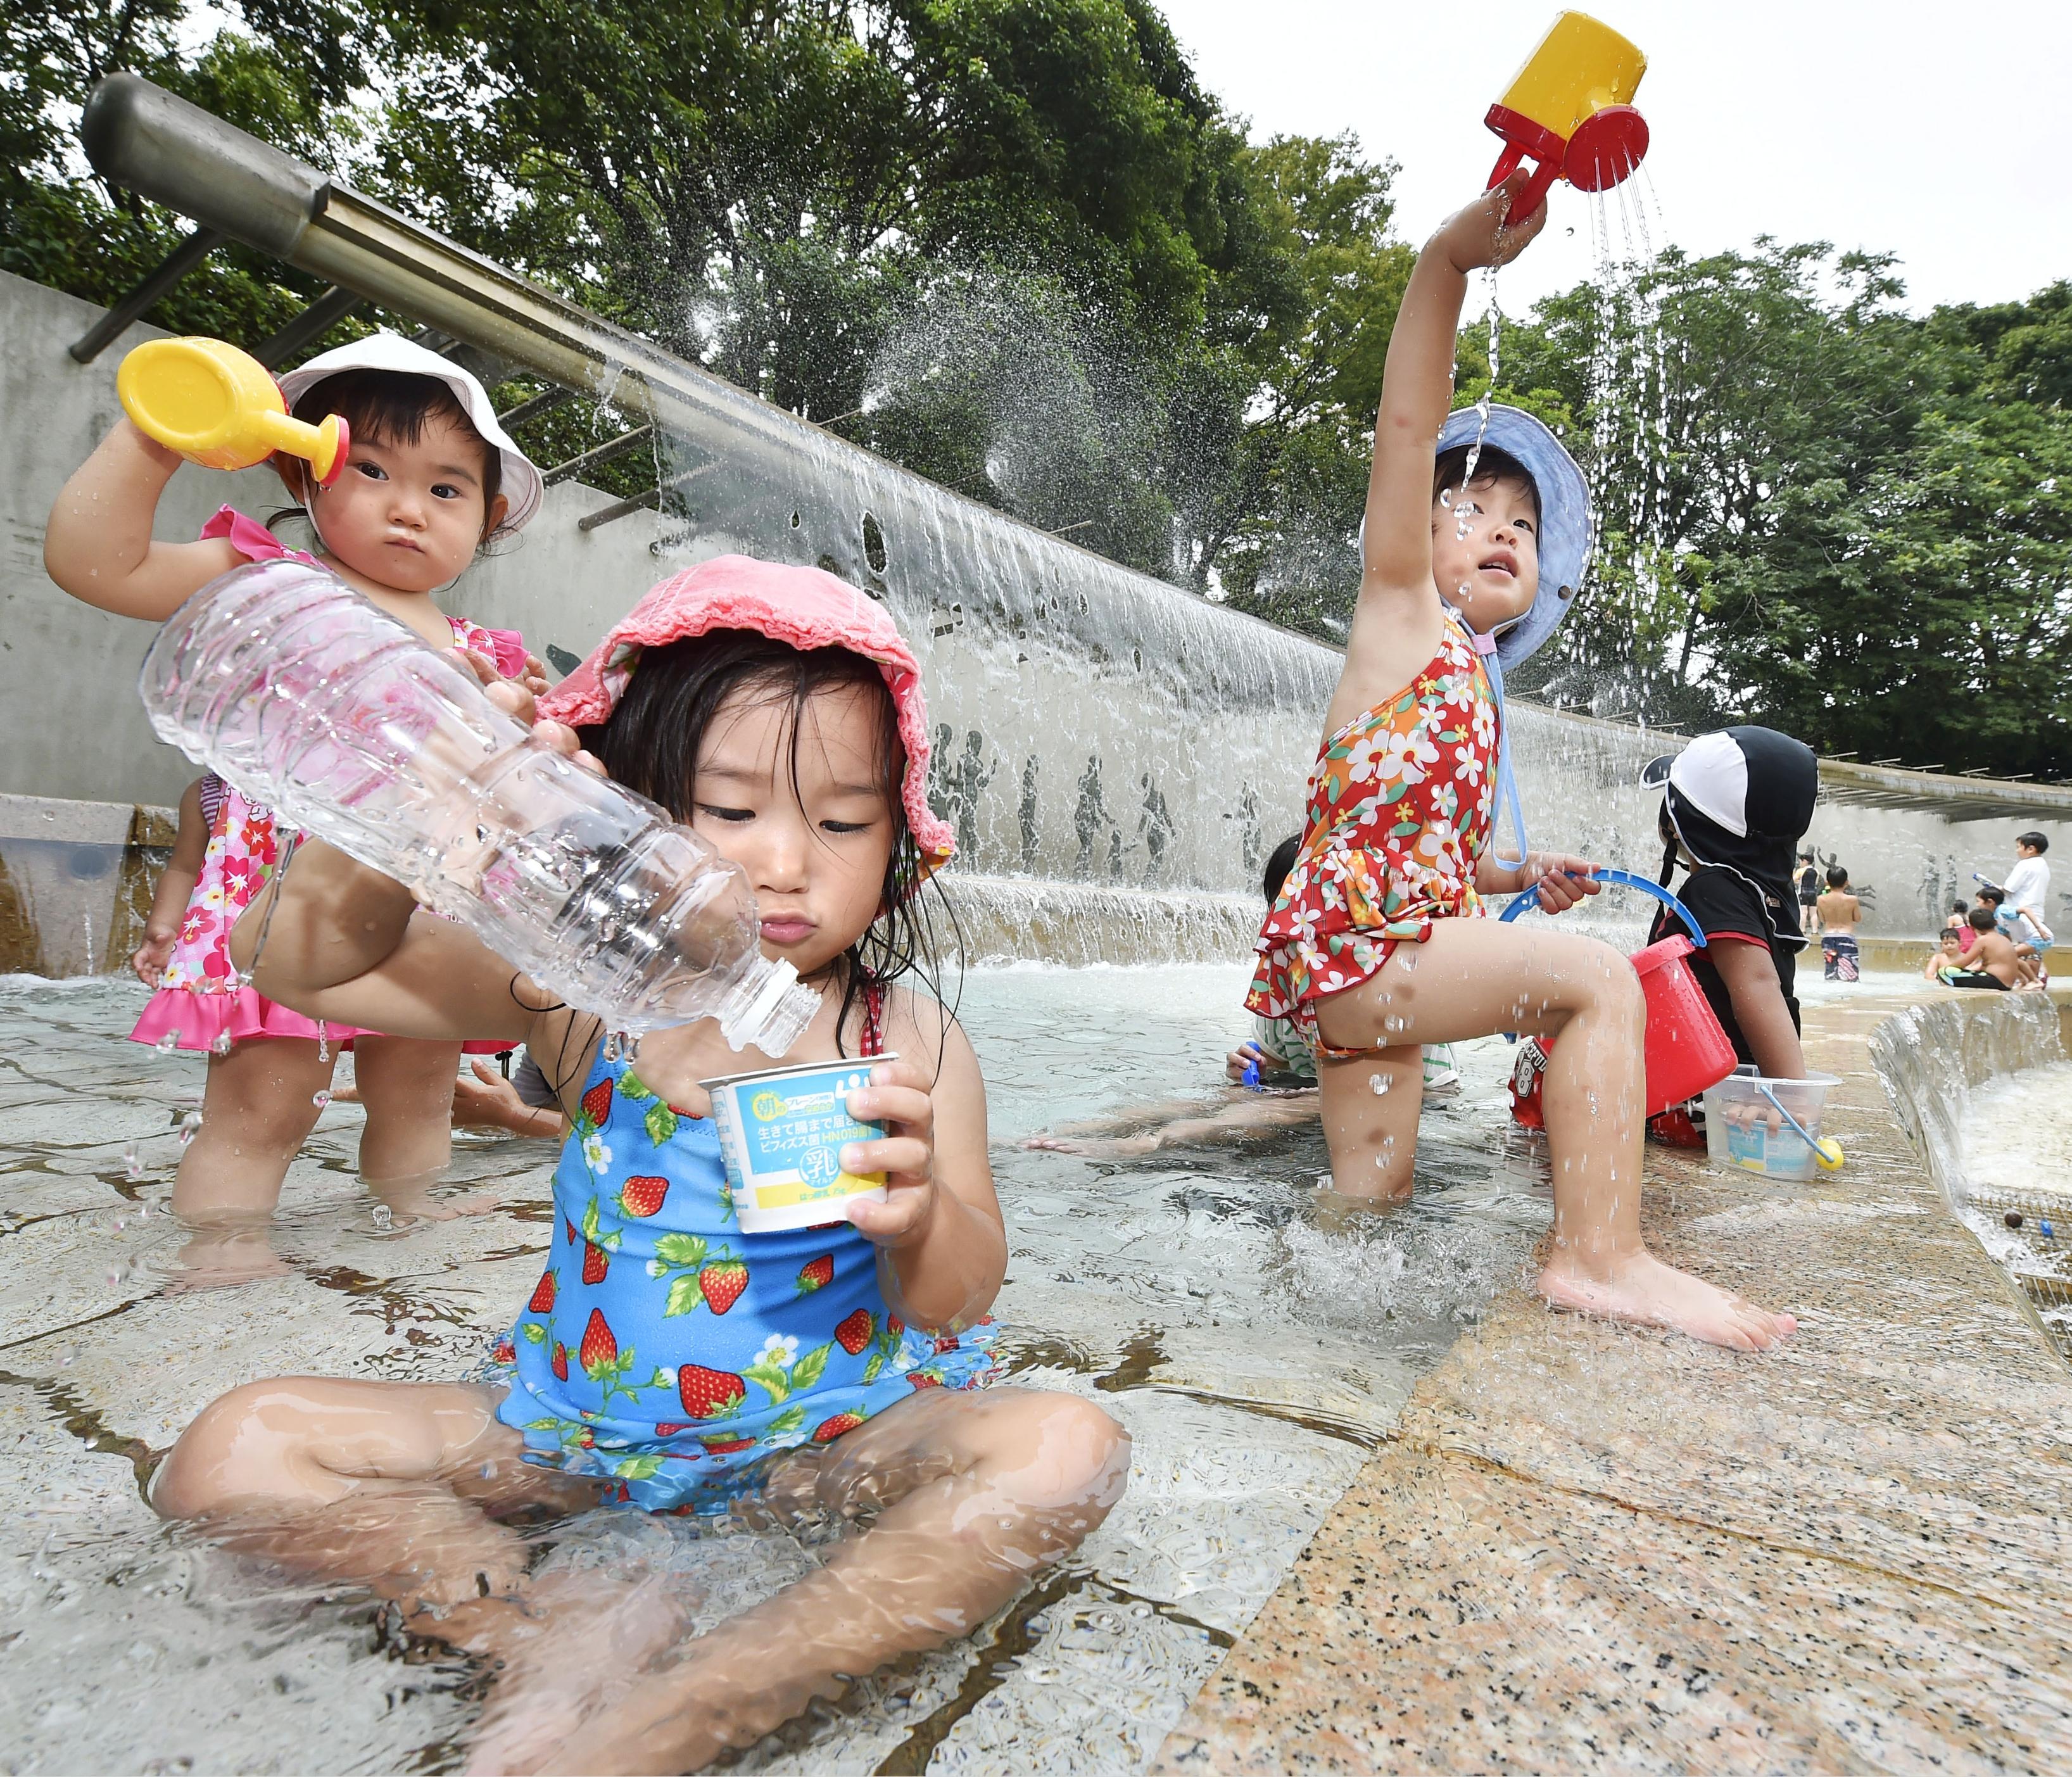 Children play with water in a fountain in Edogawa Ward, Tokyo, on Wednesday. Mercury hit the highest levels this summer in many areas of the nation. | KYODO